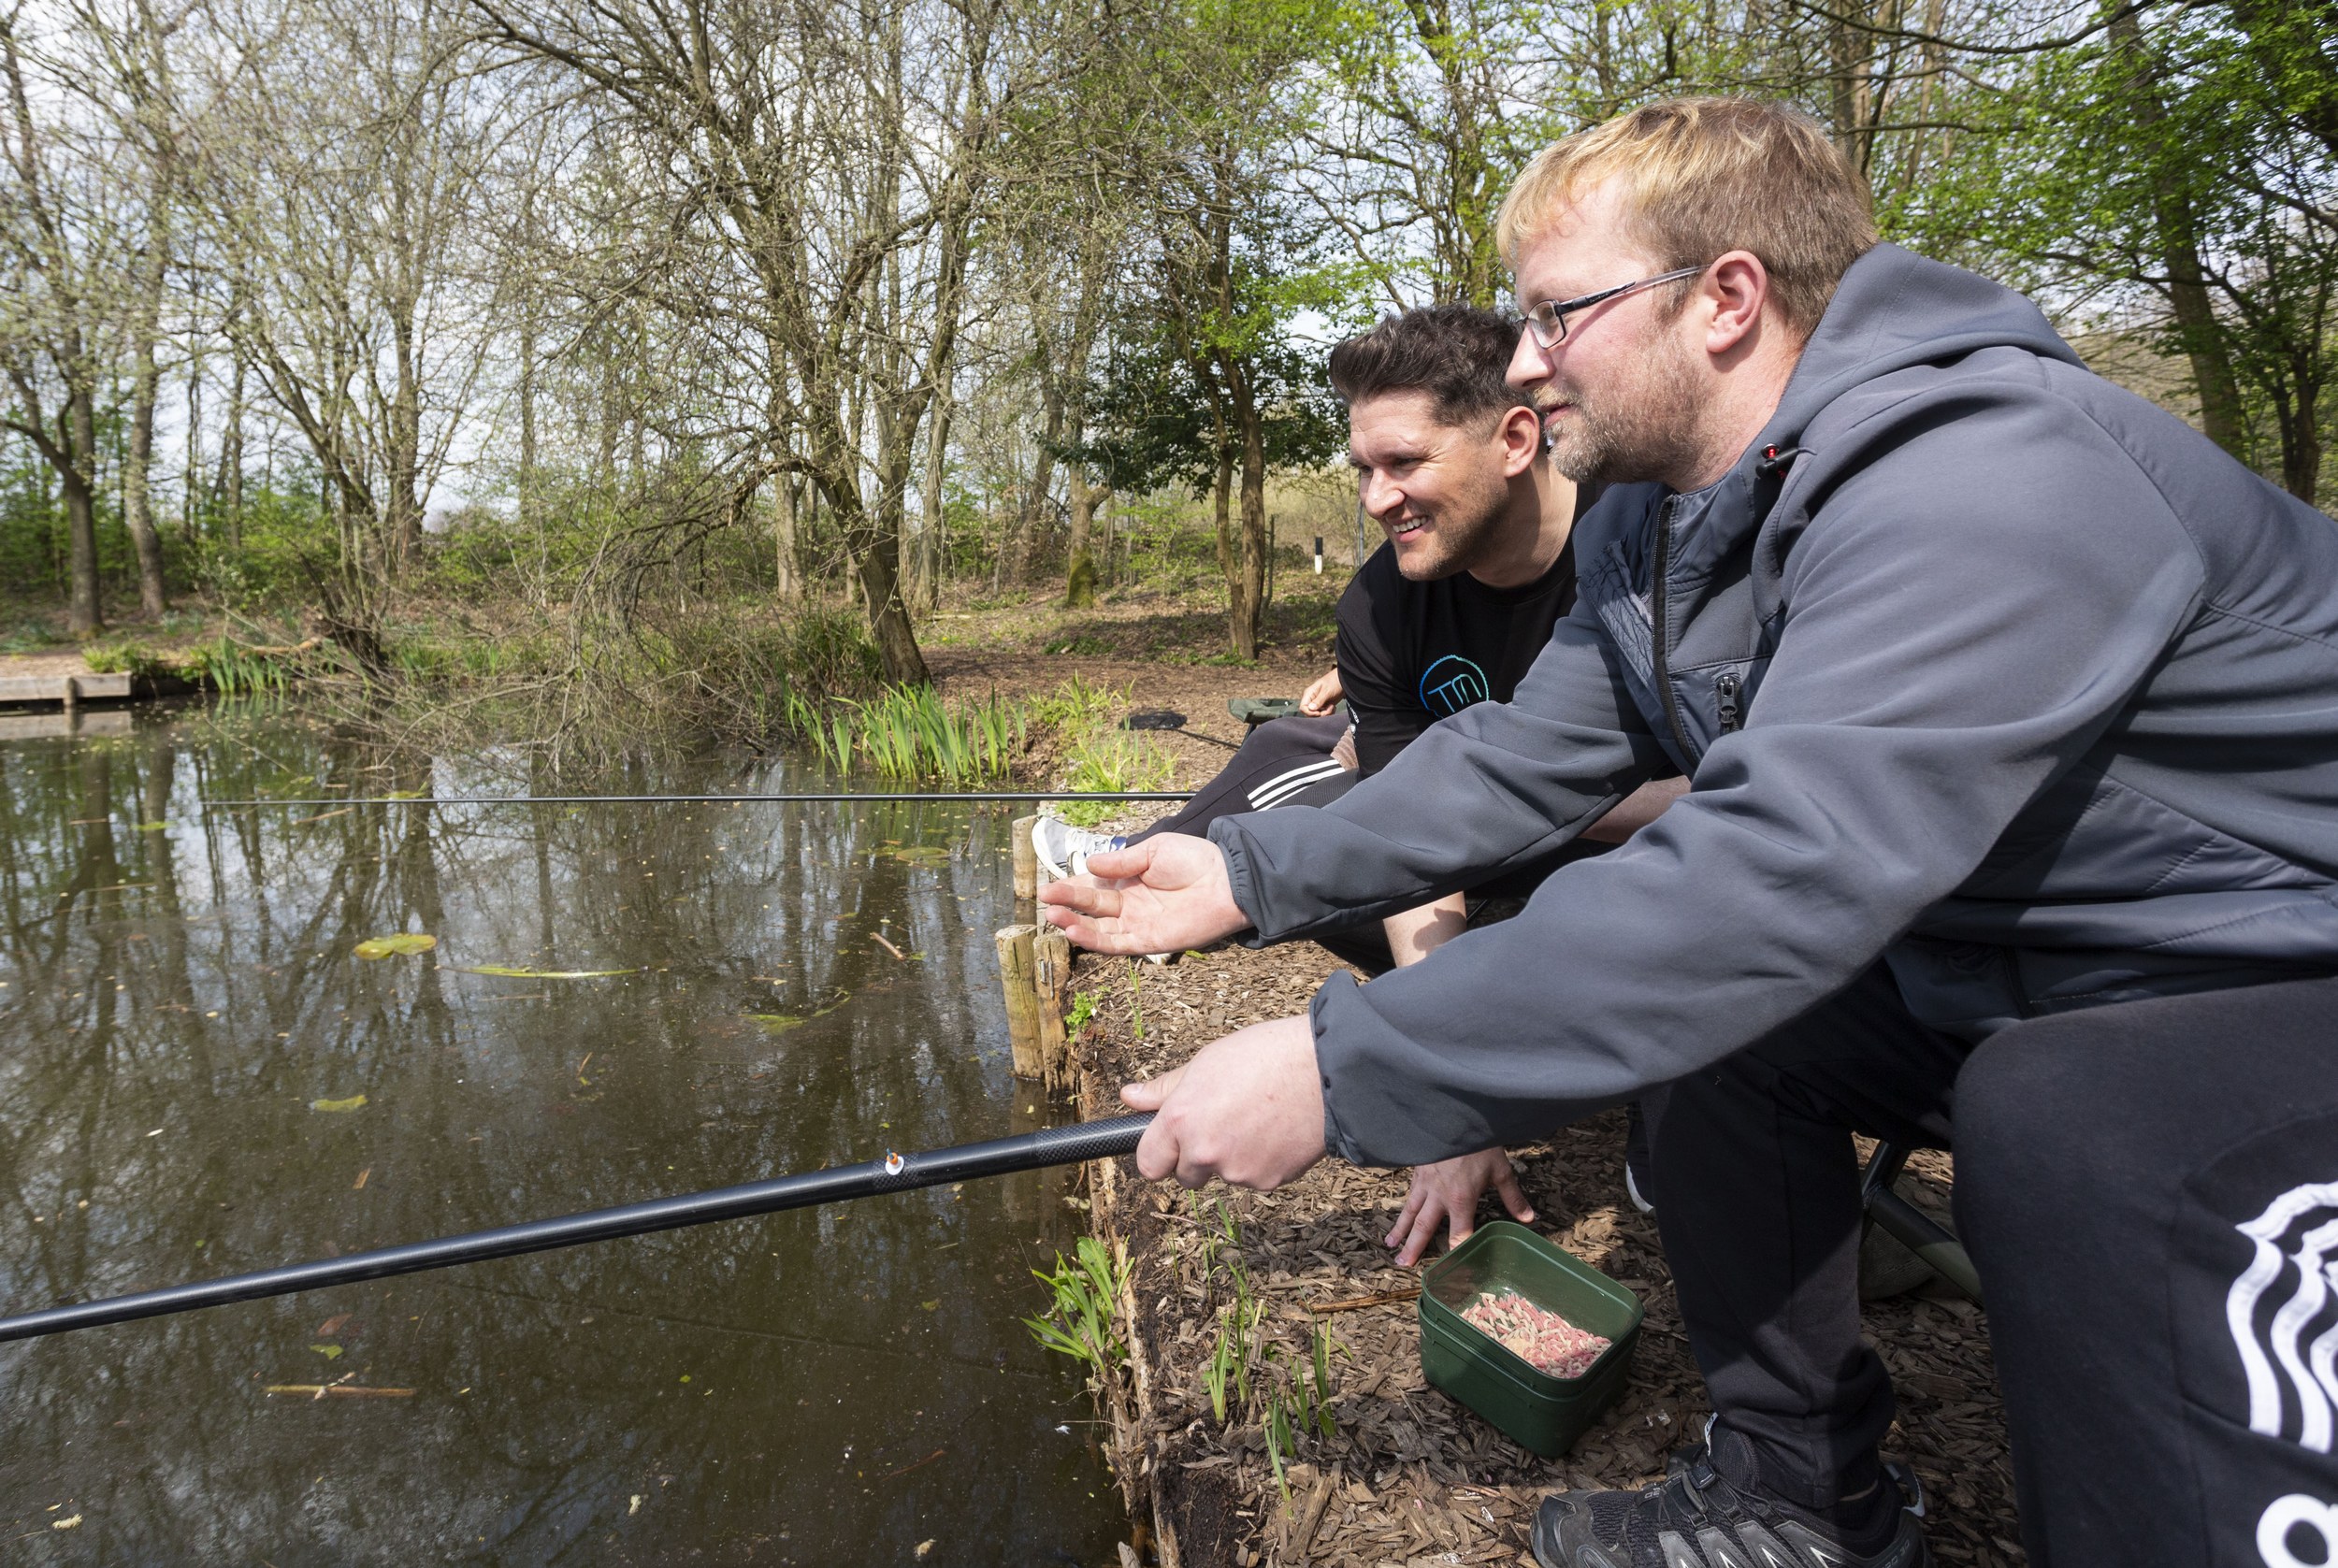 Get Fishing | Mental health service users fish at Boggart Hole Clough, in Greater Manchester, with the aid of staff and occupational therapists. The NHS has teamed up with a fishing social group Tackling Minds to offer fishing to people with anxiety and depression. NHS Northern Care Alliance has become the first hospital trust in the UK to offer this scheme, Pictured in Greater Manchester, April 20 2021.